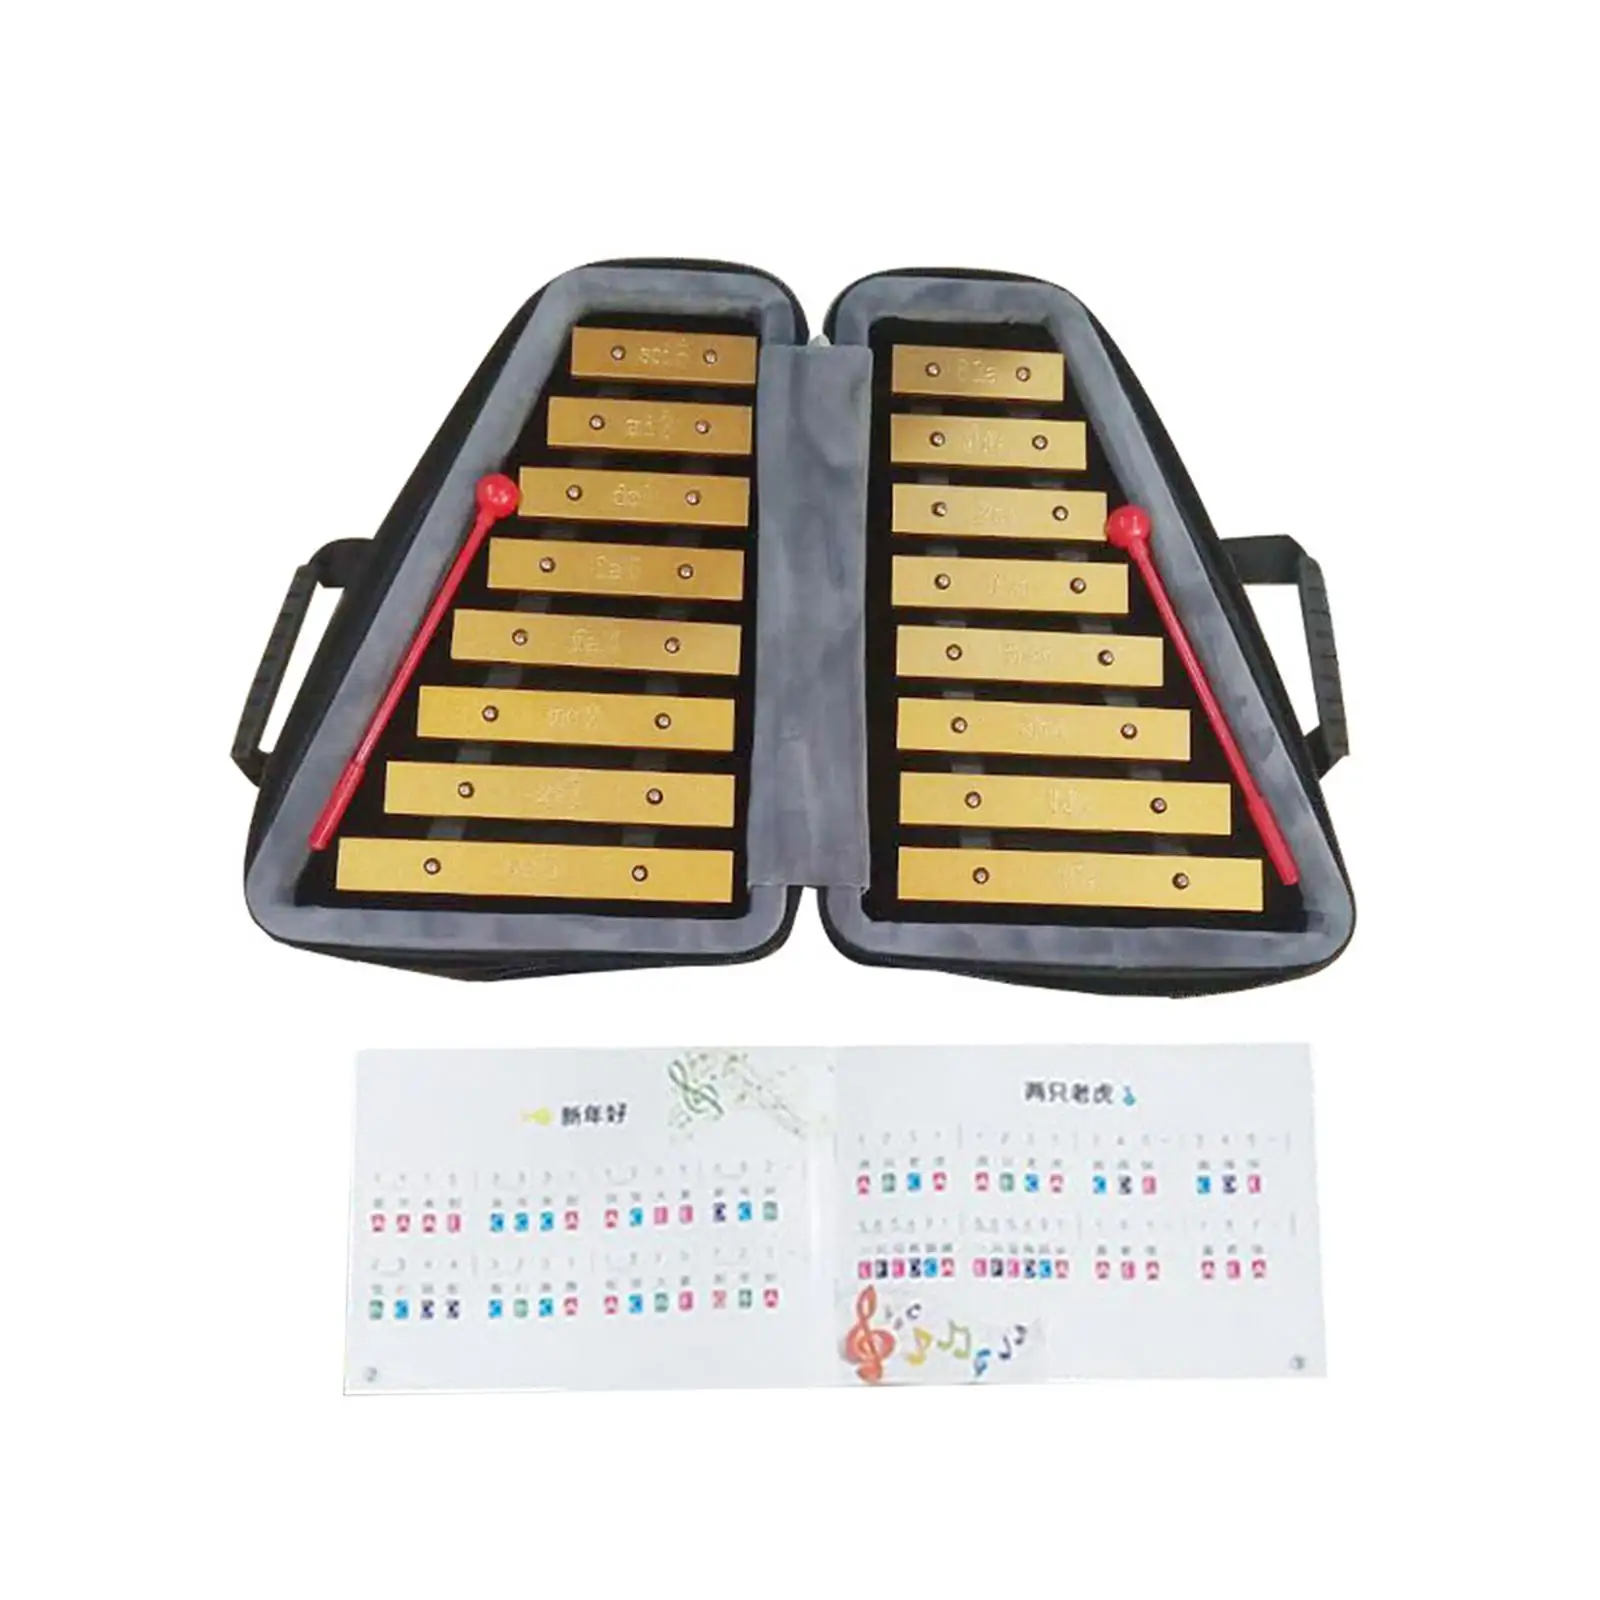 16 Note Metal Xylophone Portable Music Enlightenment Xylophone for Kids for